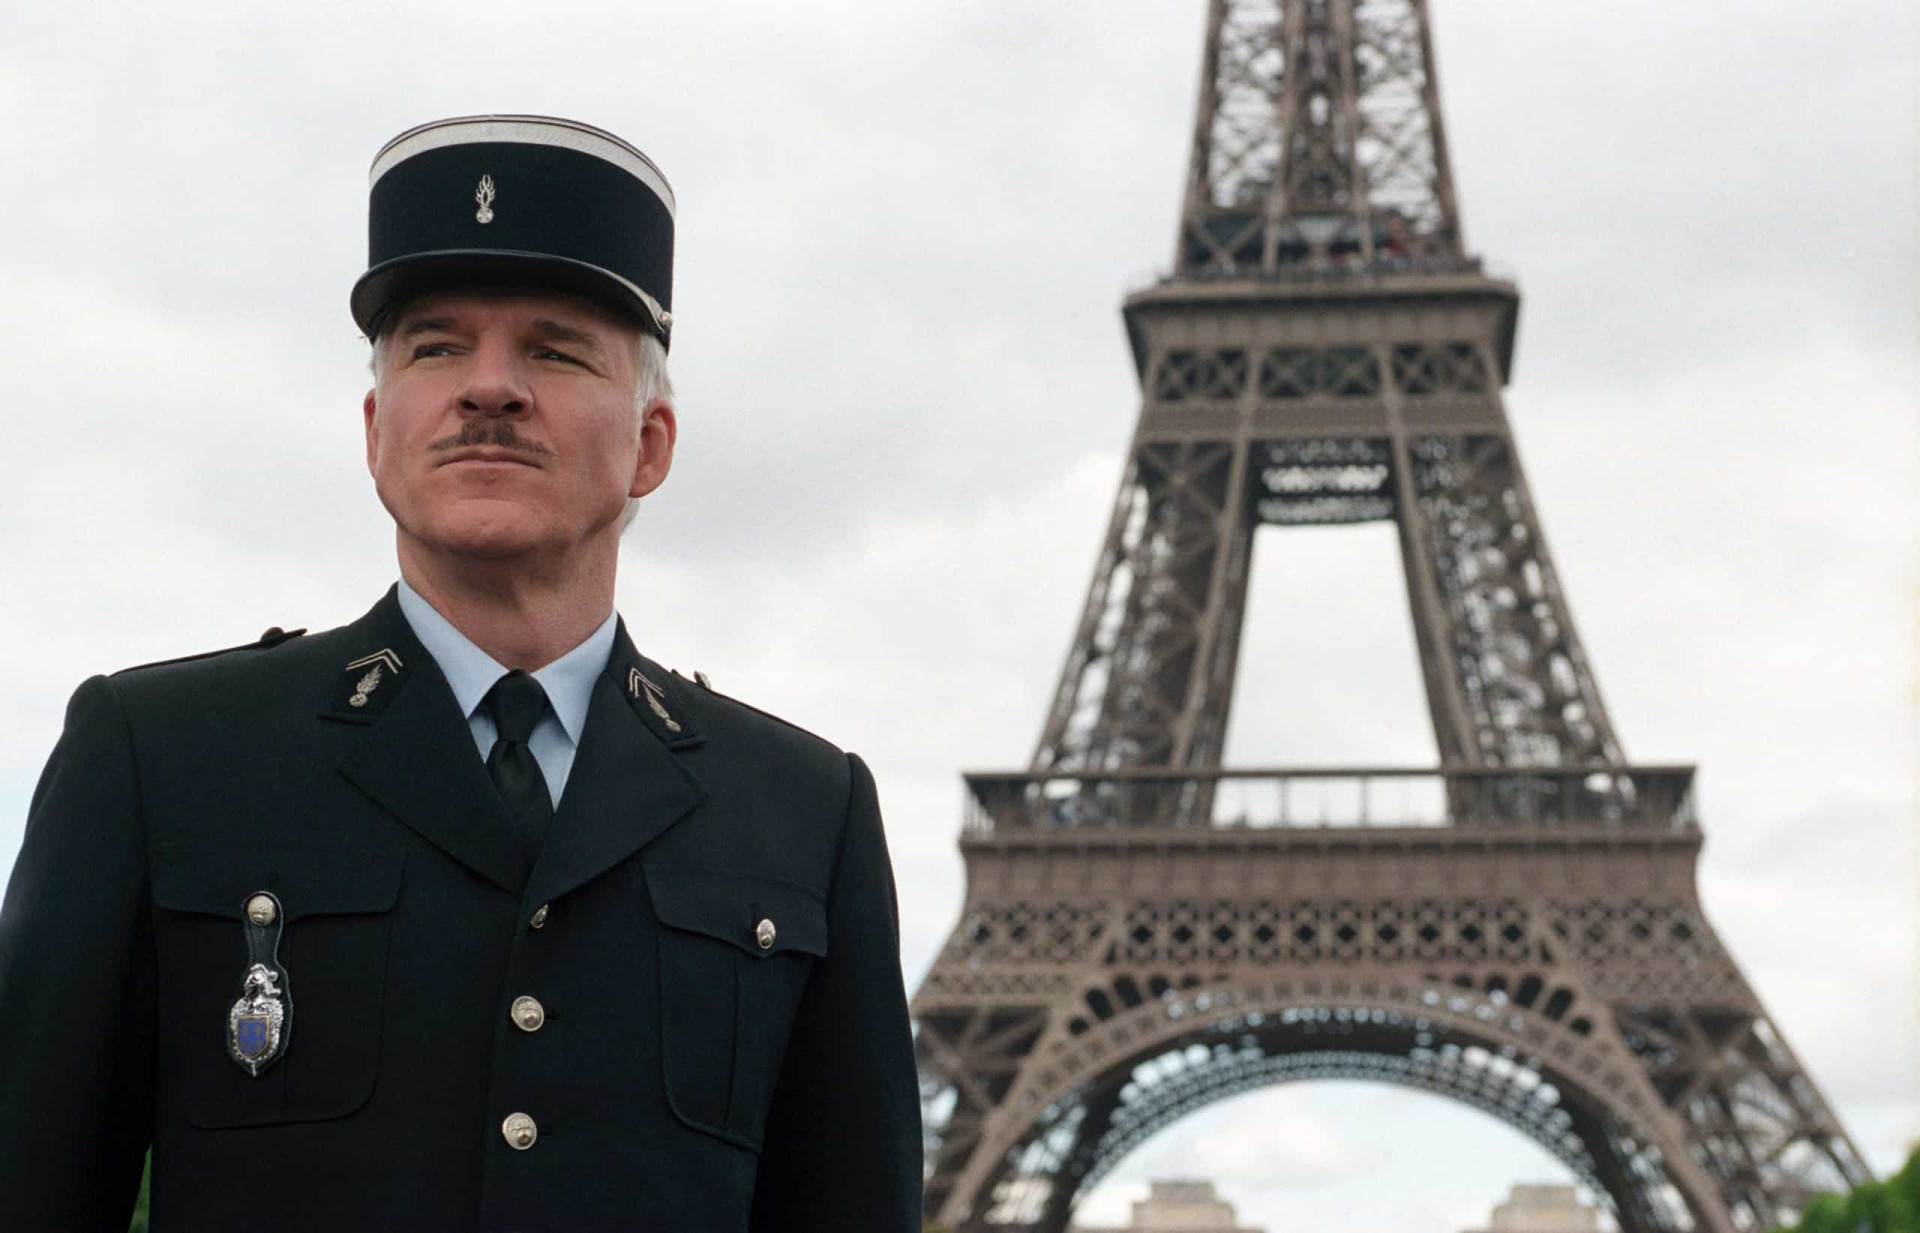 <p>Steve Martin rocks the remake of 'The Pink Panther.' He plays Inspector Clouseau, who tumbles into an important investigation, bringing chaos and disorder. It is a must-see comedy set in Paris.</p><p><a href="https://www.msn.com/en-us/community/channel/vid-7xx8mnucu55yw63we9va2gwr7uihbxwc68fxqp25x6tg4ftibpra?cvid=94631541bc0f4f89bfd59158d696ad7e">Follow us and access great exclusive content every day</a></p>